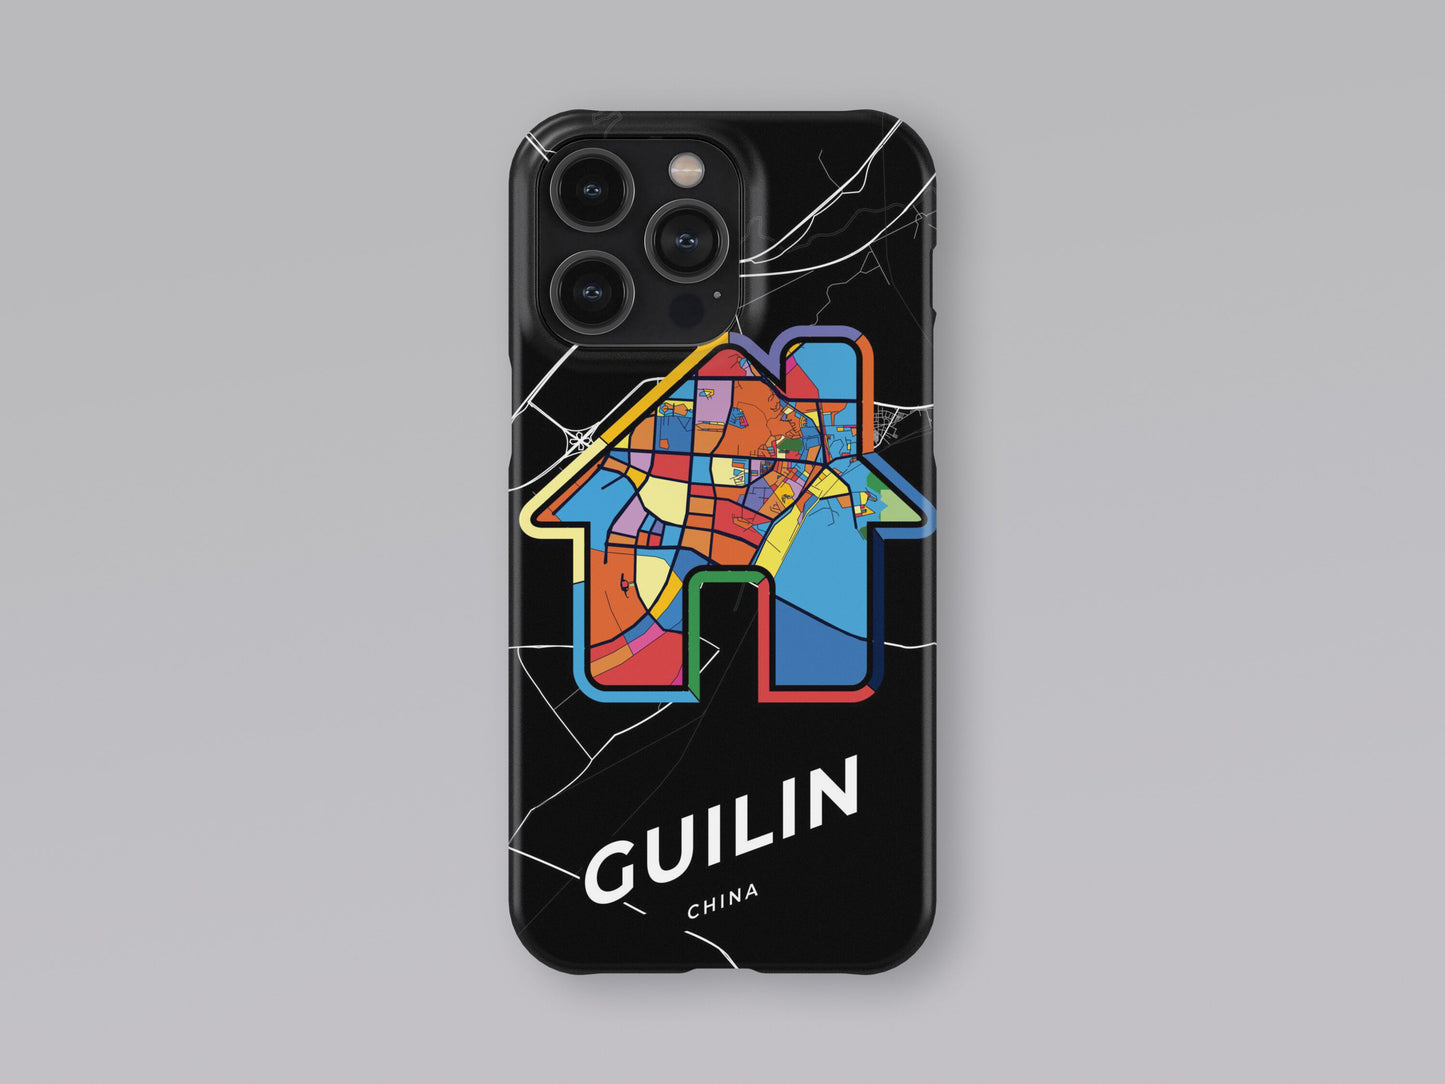 Guilin China slim phone case with colorful icon. Birthday, wedding or housewarming gift. Couple match cases. 3